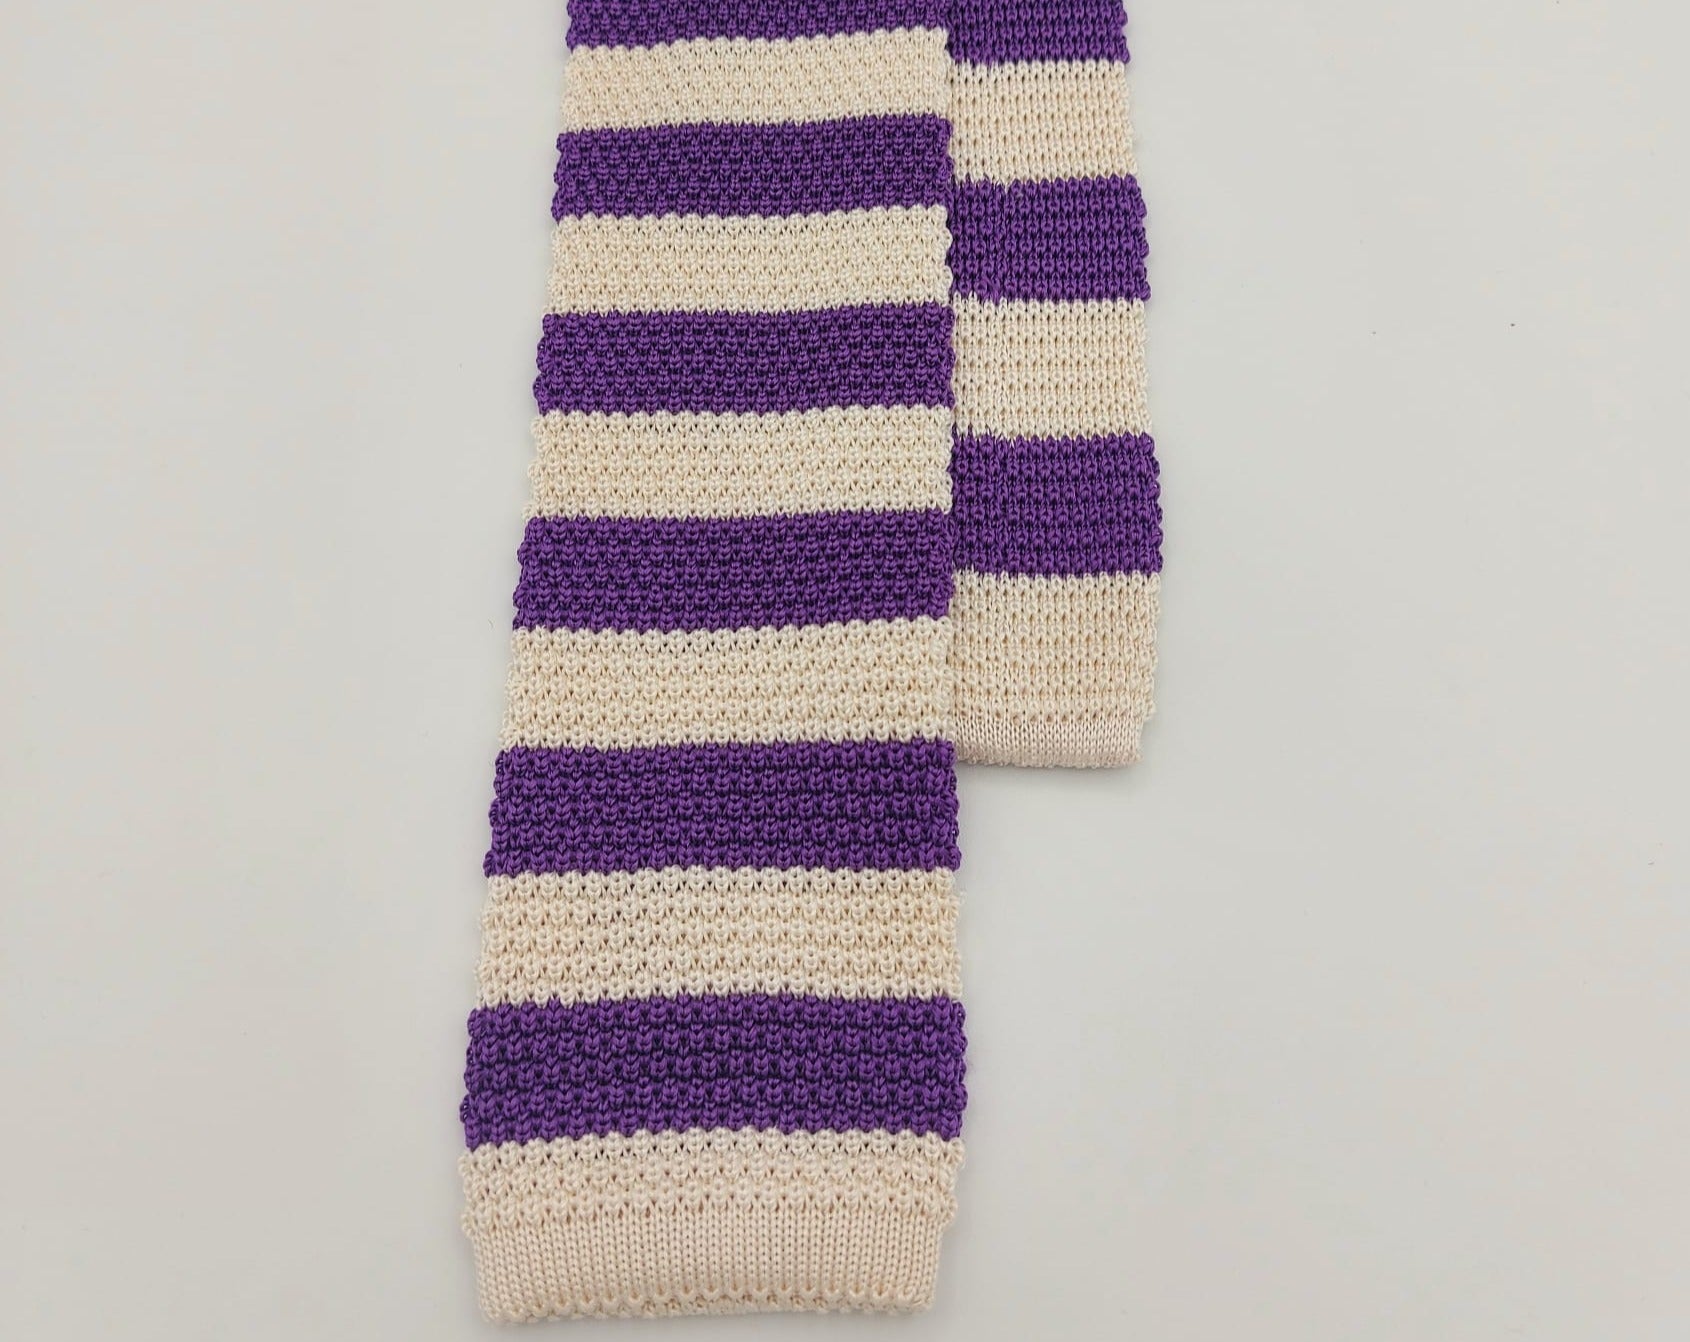 Cruciani & Bella 100% Knitted Silk White and Purple knitted tie Handmade in Italy 6 cm x 145 cm #6368